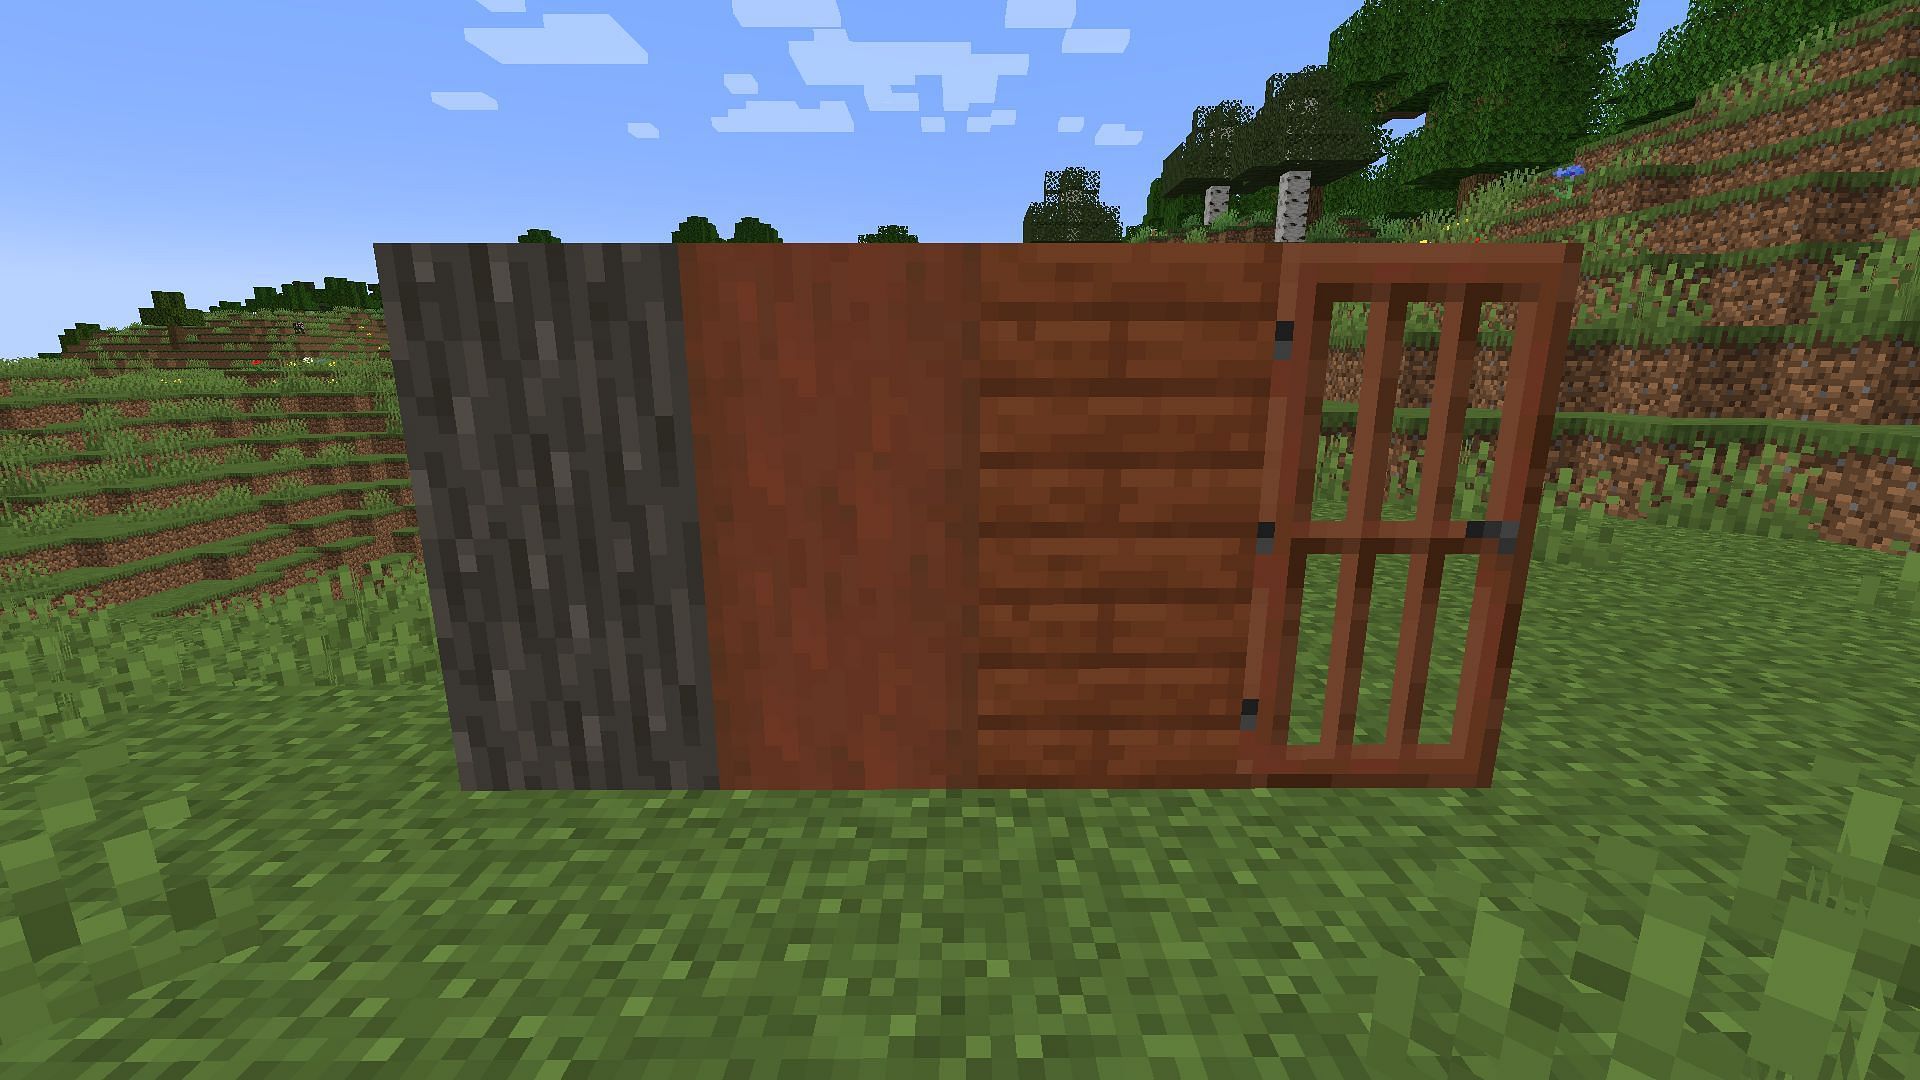 Acacia wood and some of its different blocks (Image via Minecraft)